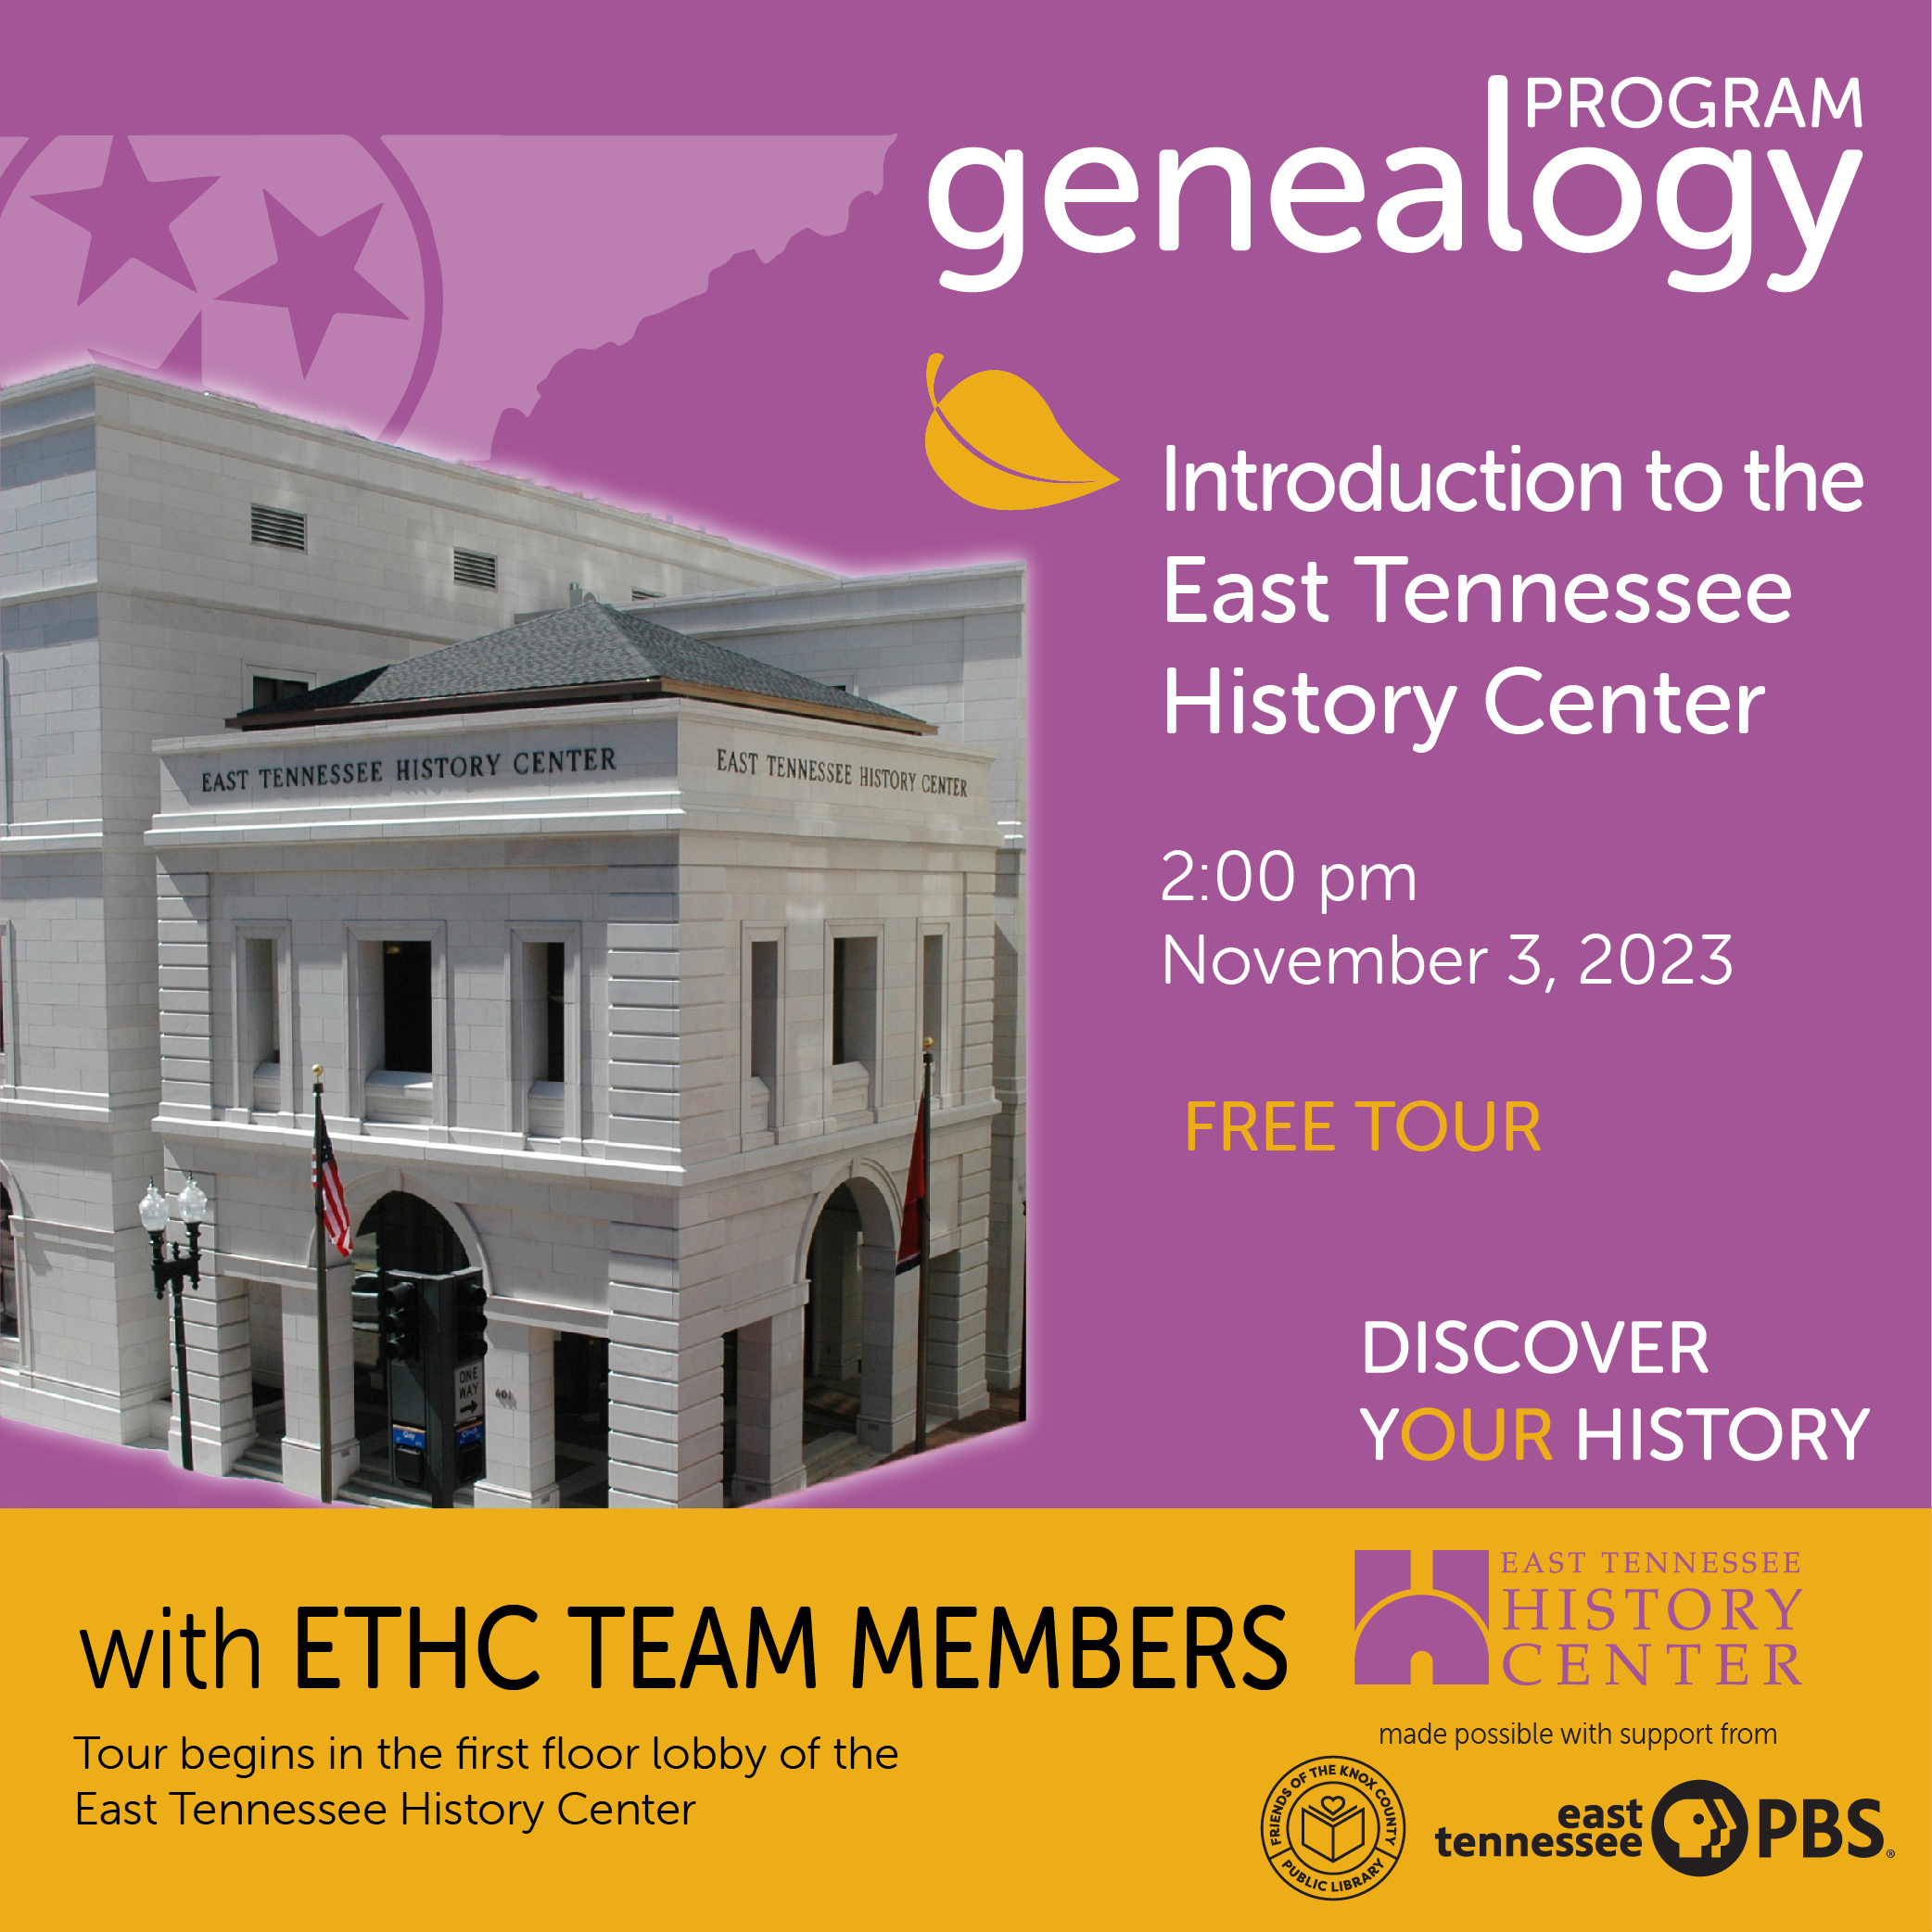 Introduction to the East Tennessee History Center